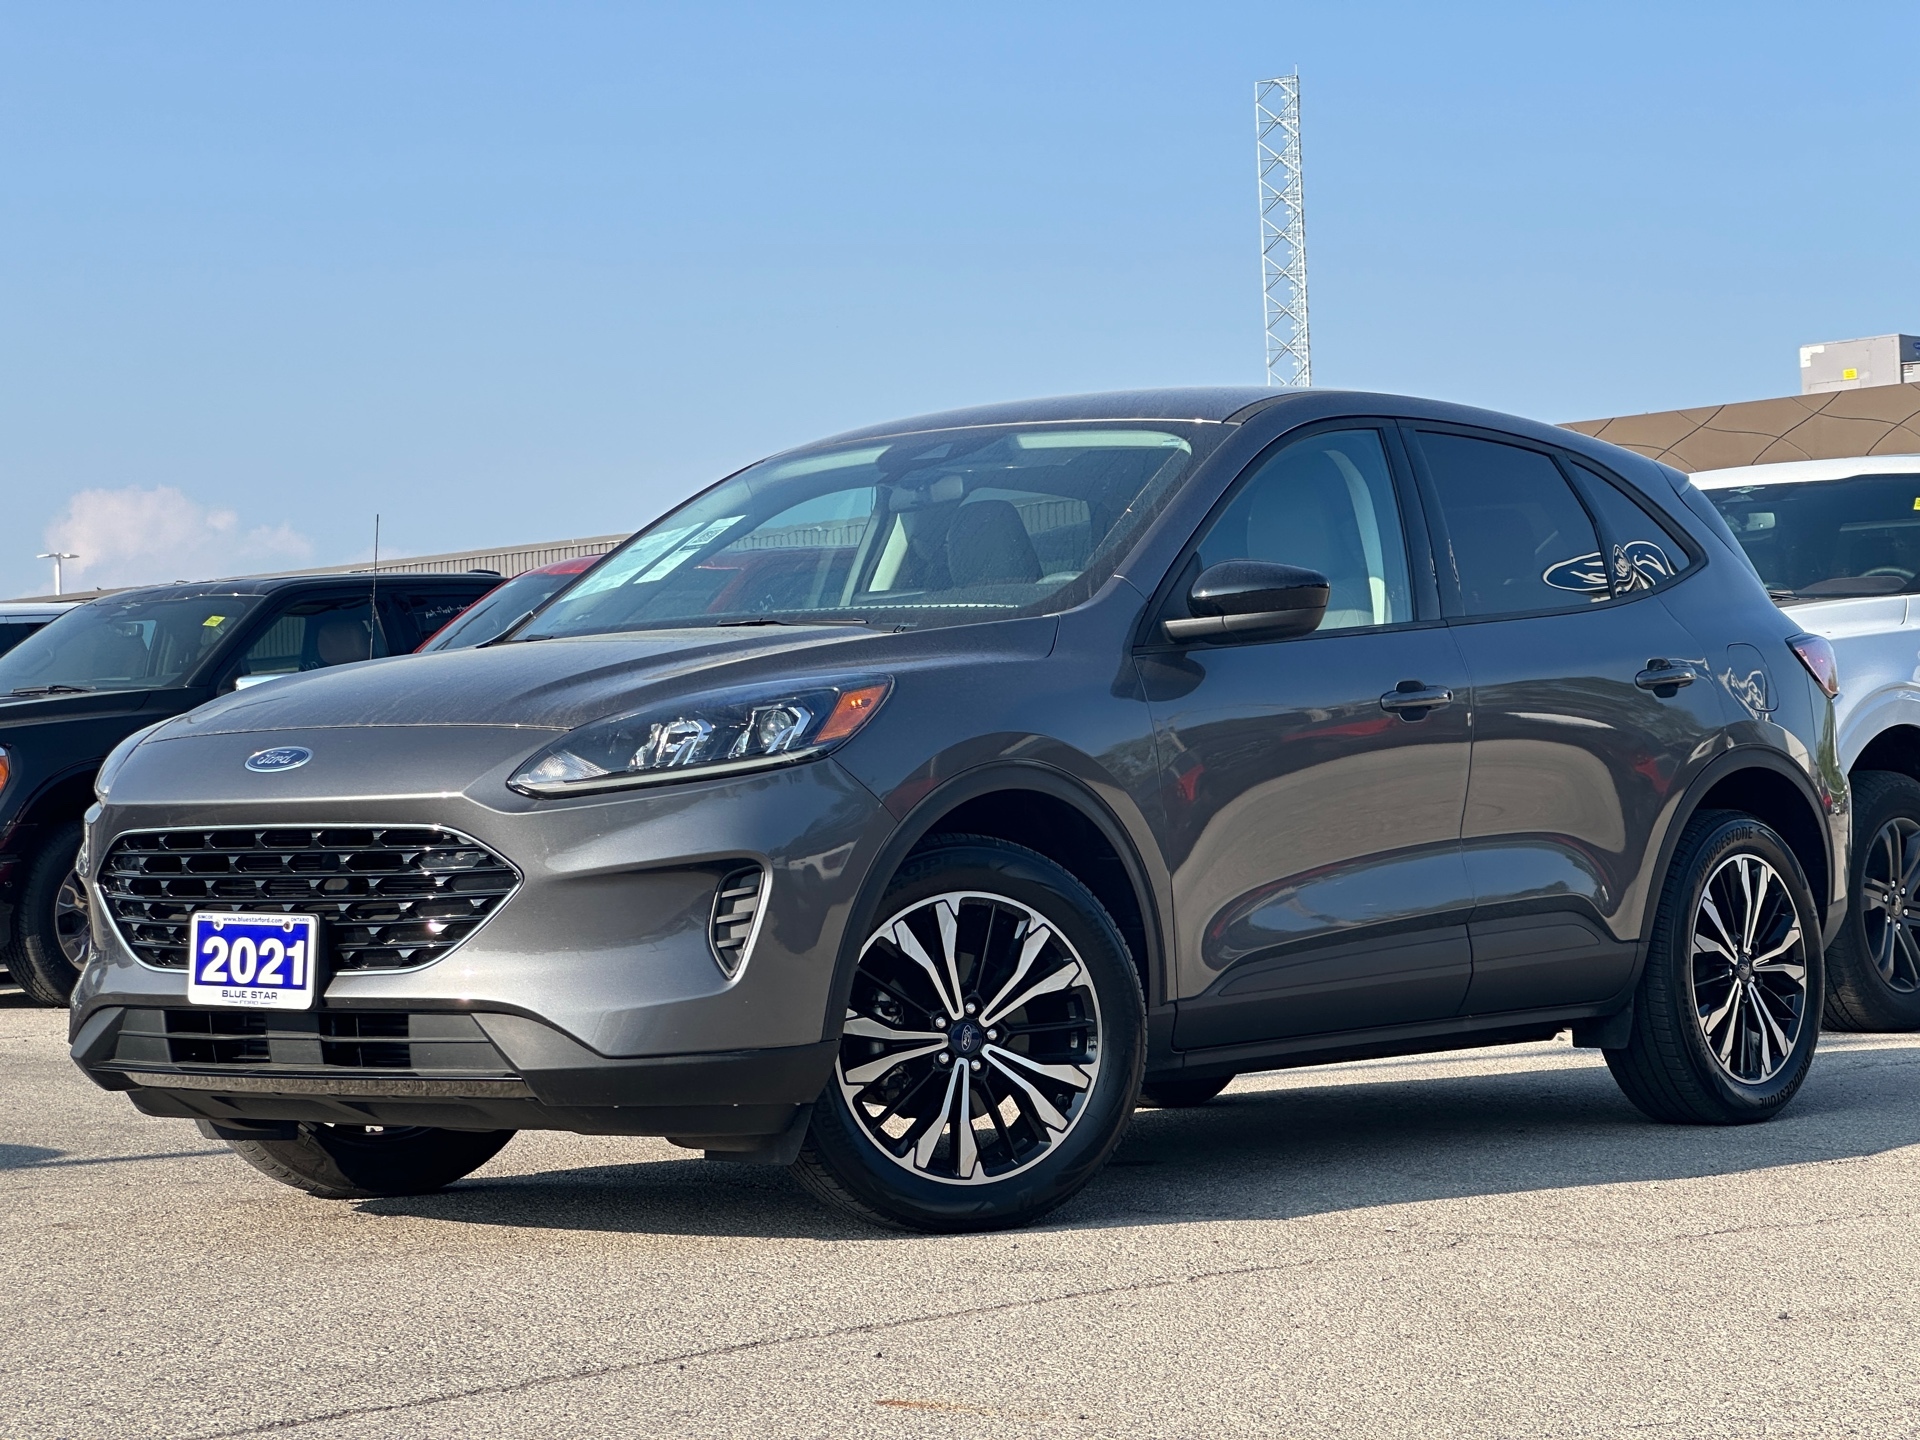 2021 Ford Escape SE - AWD, Sport Appearance Package, Heated Steerin